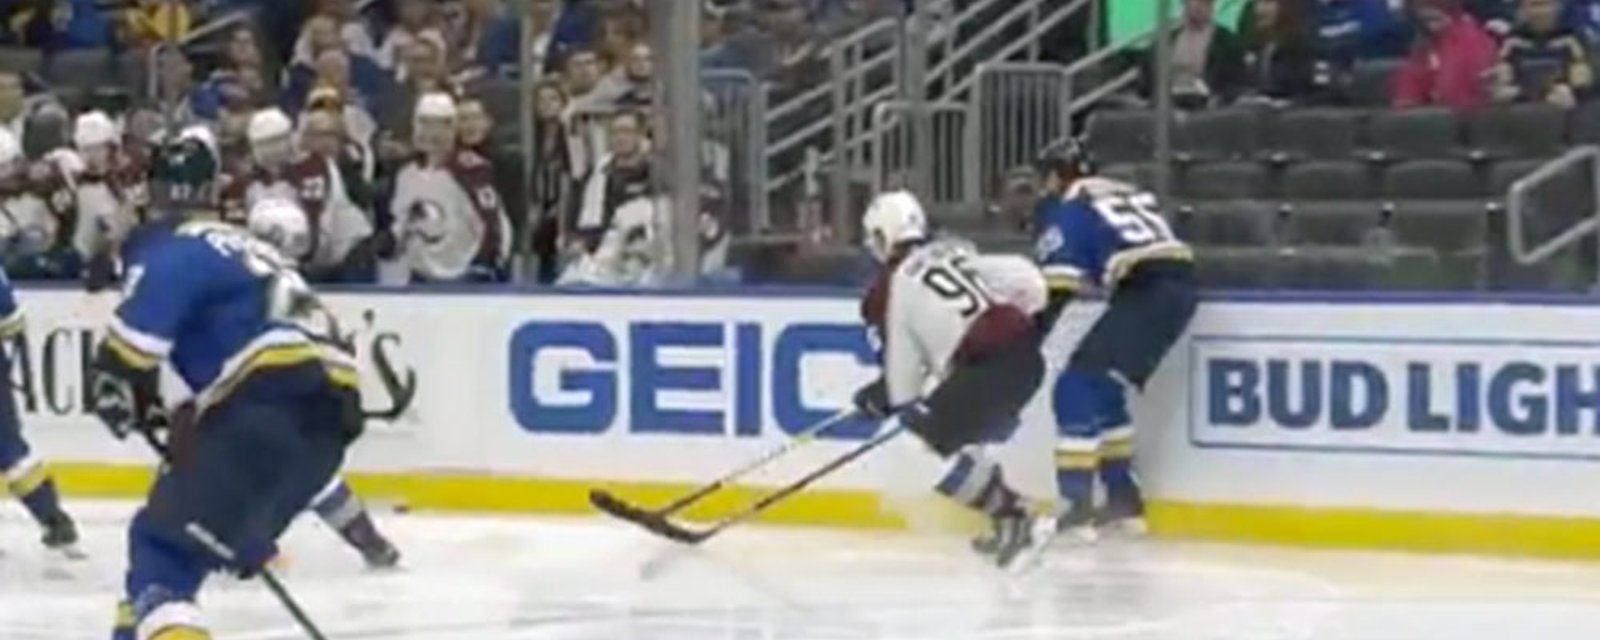 Rantanen forced to leave game after gruesome leg injury